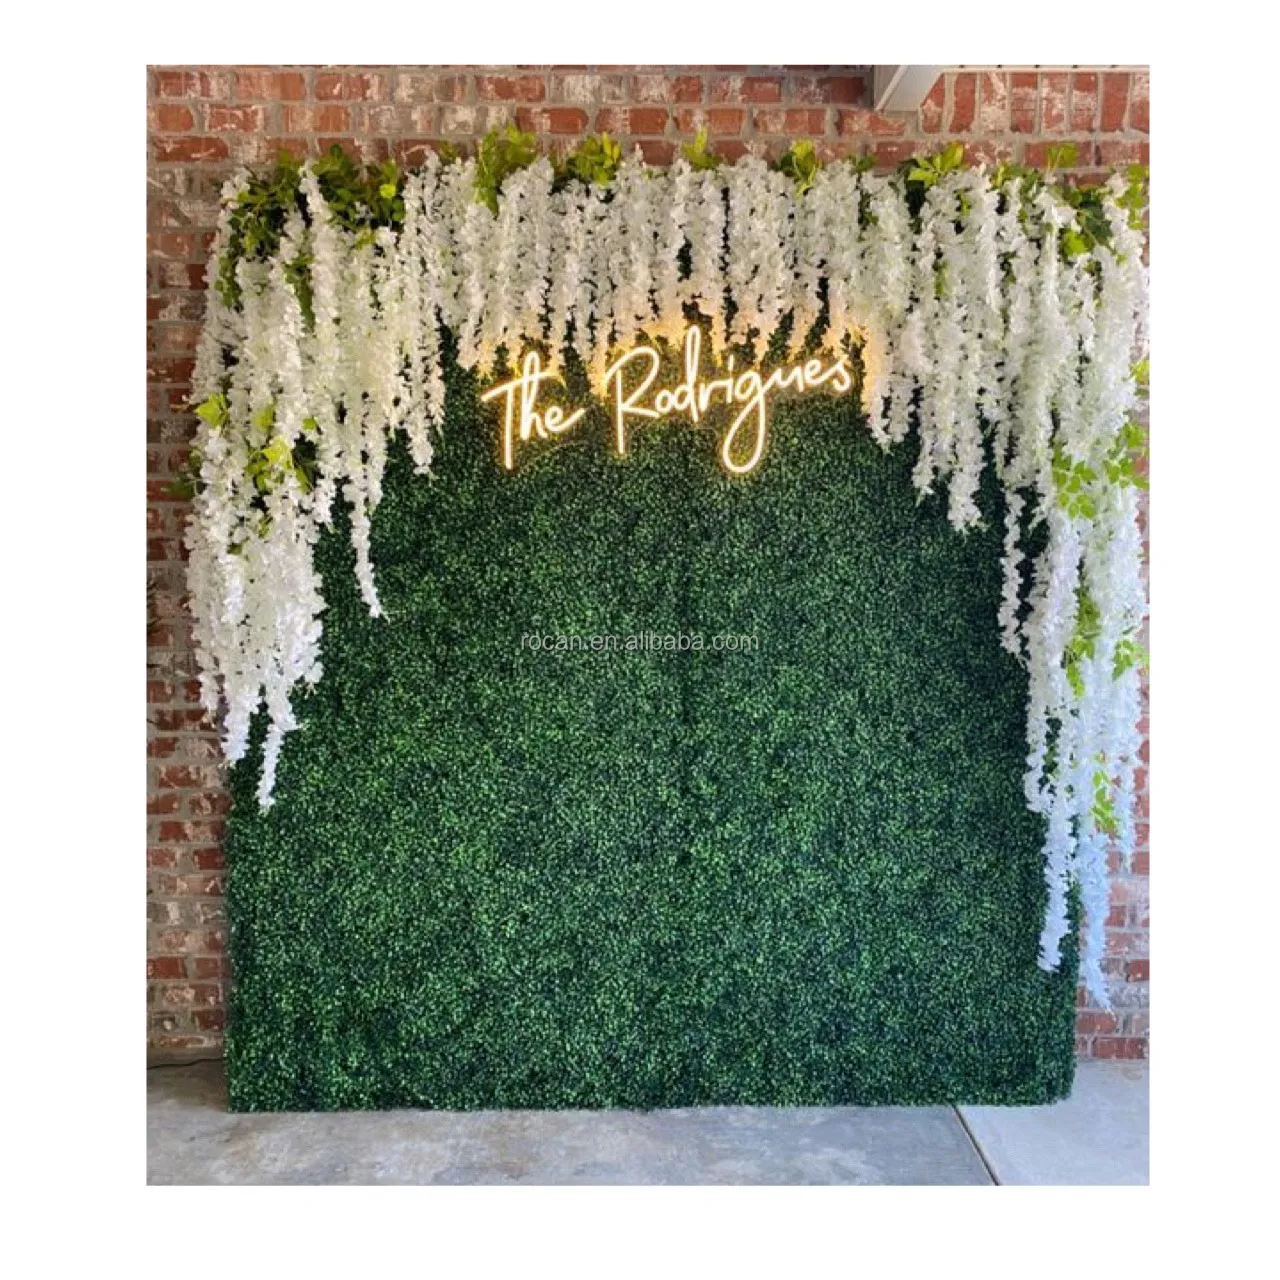 Wedding Ever Green party Wall birthday Flower Artificial Tropical Plant Jungle Boxwood Panel Grass Greenery Grass Wall